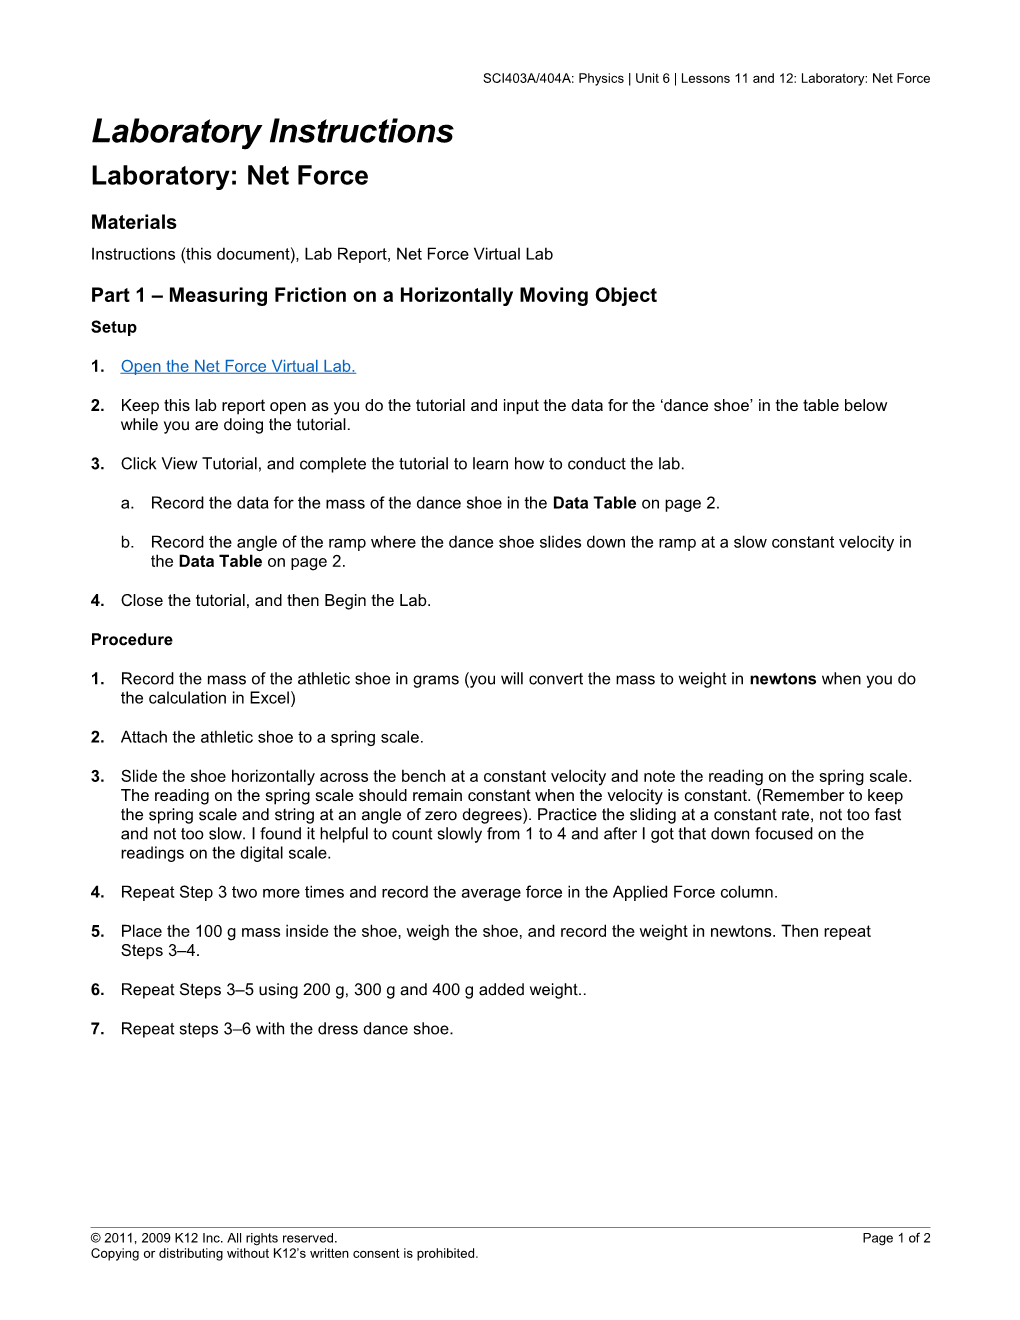 SCI403A/404A: Physics Unit 6 Lessons 11 and 12: Laboratory: Net Force